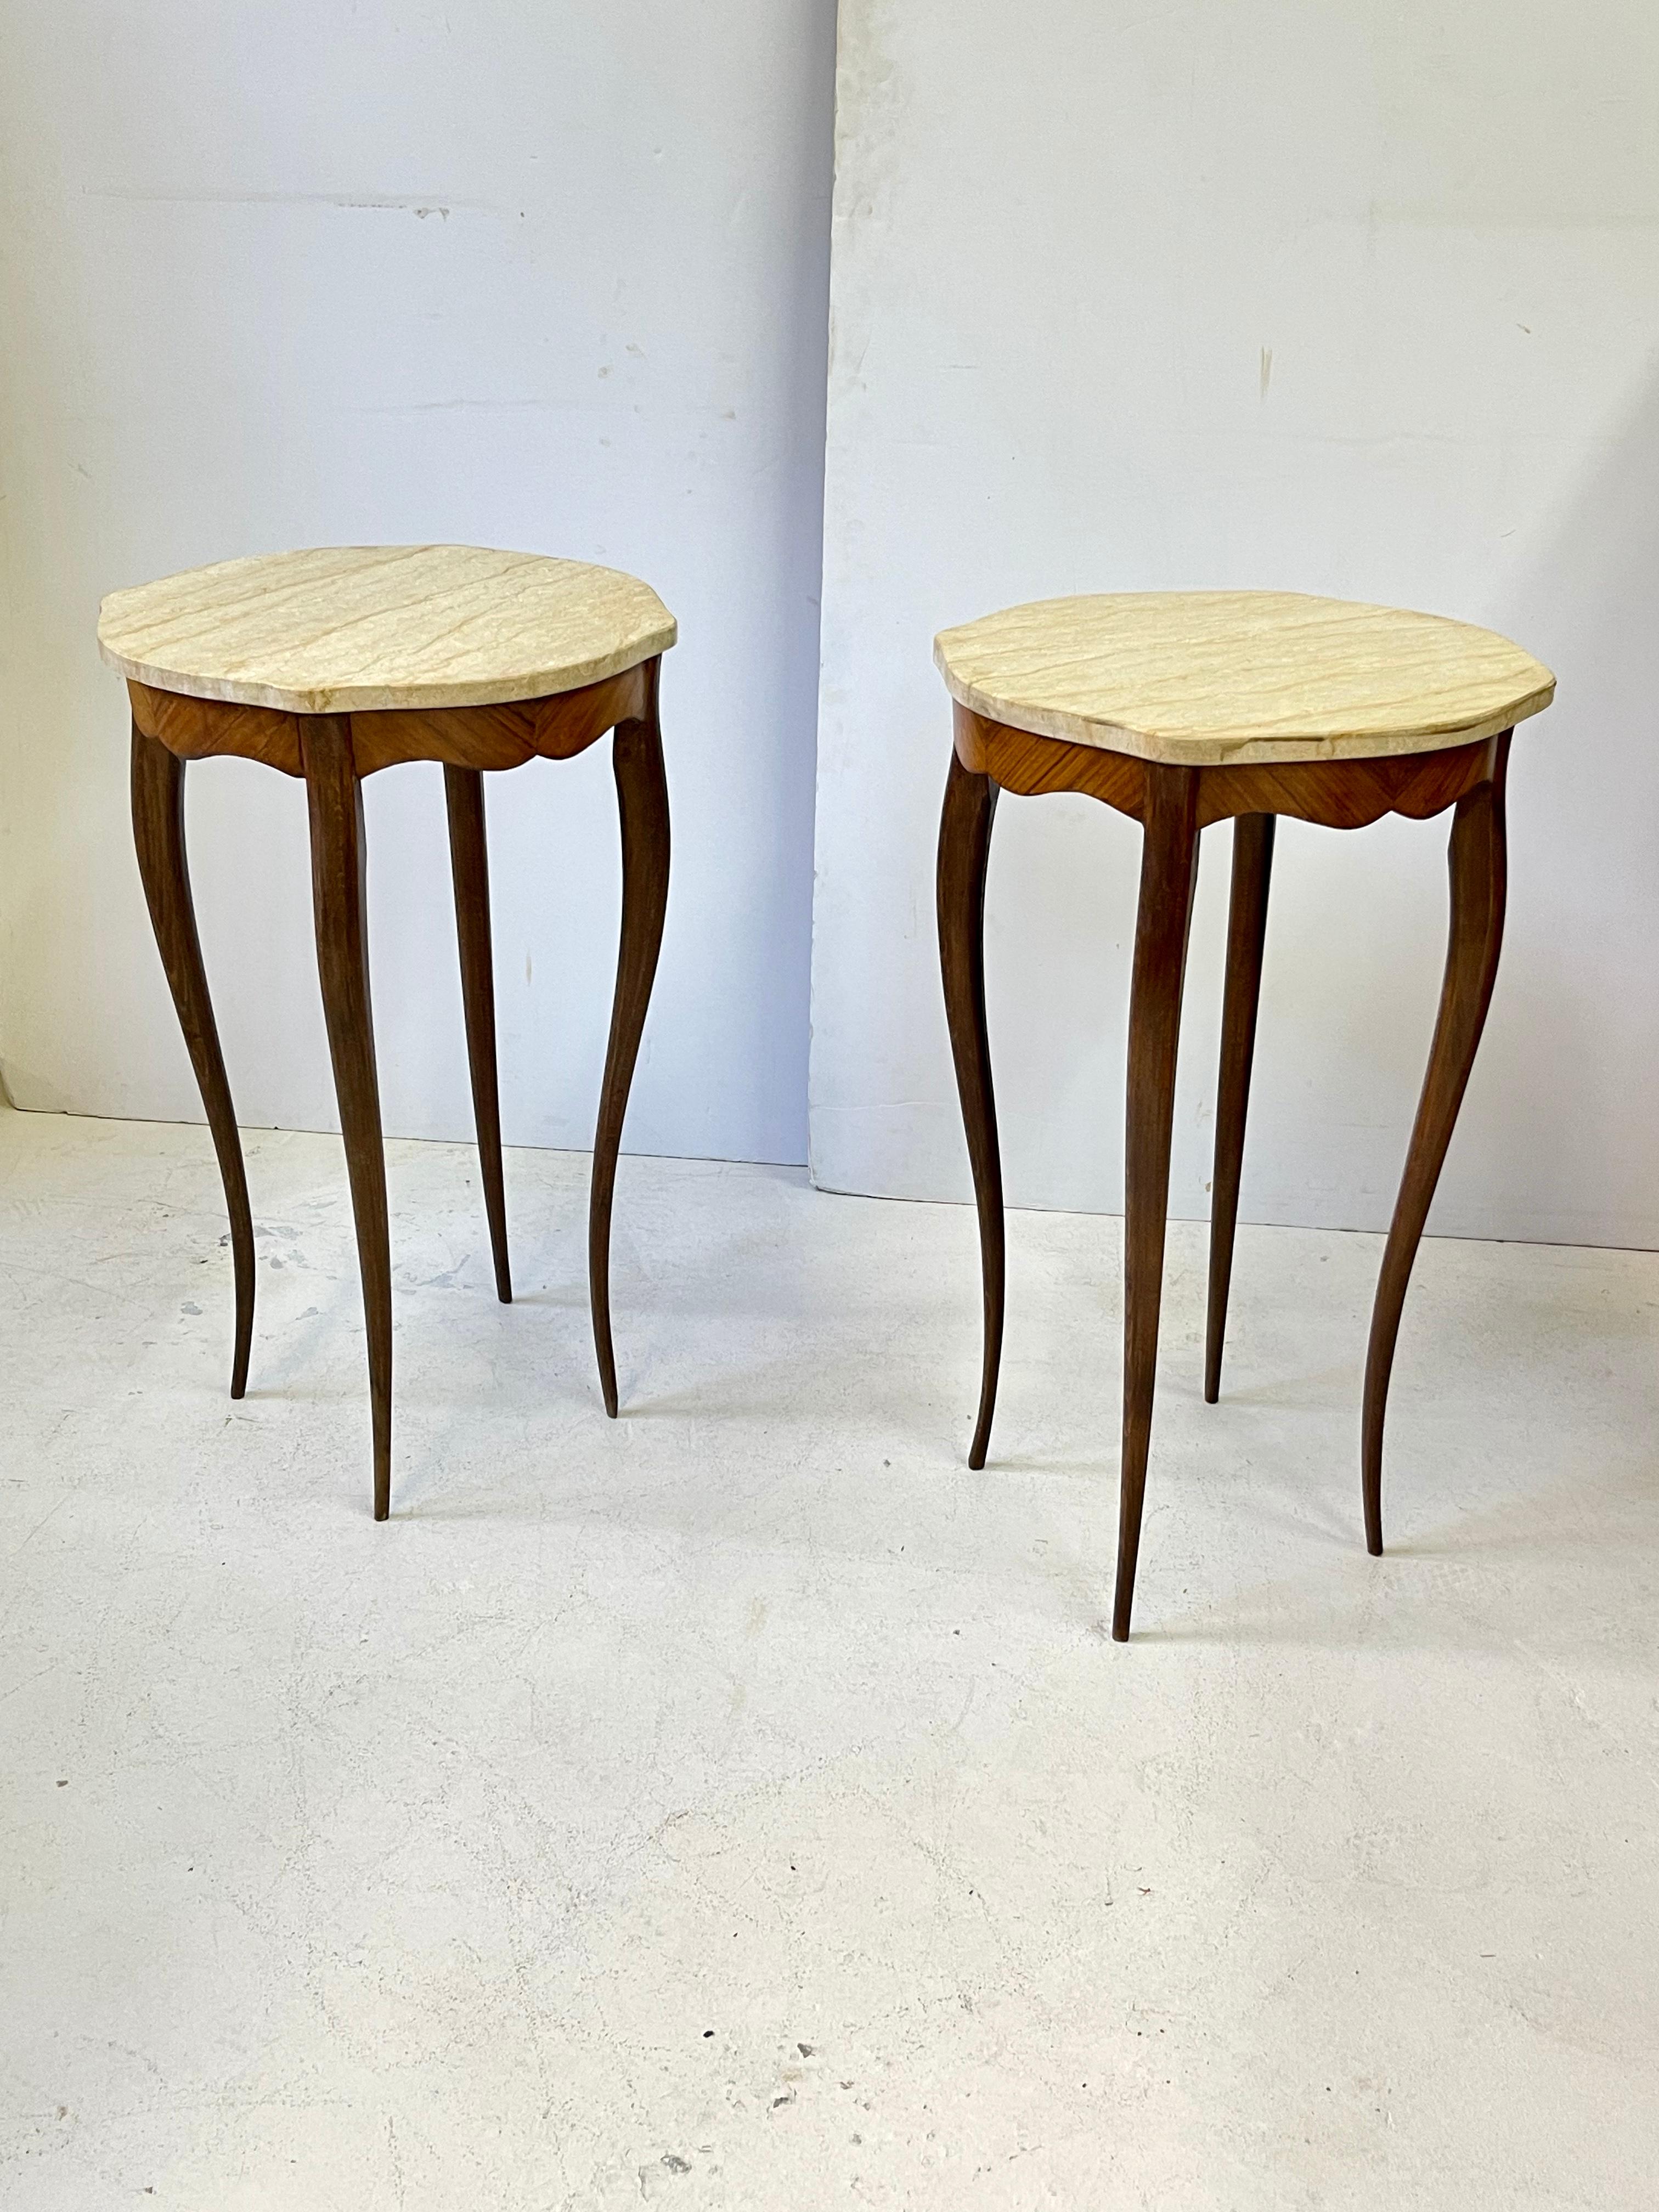 Marble Pair of Italian Art Nouveau Side Tables or Plant Stands